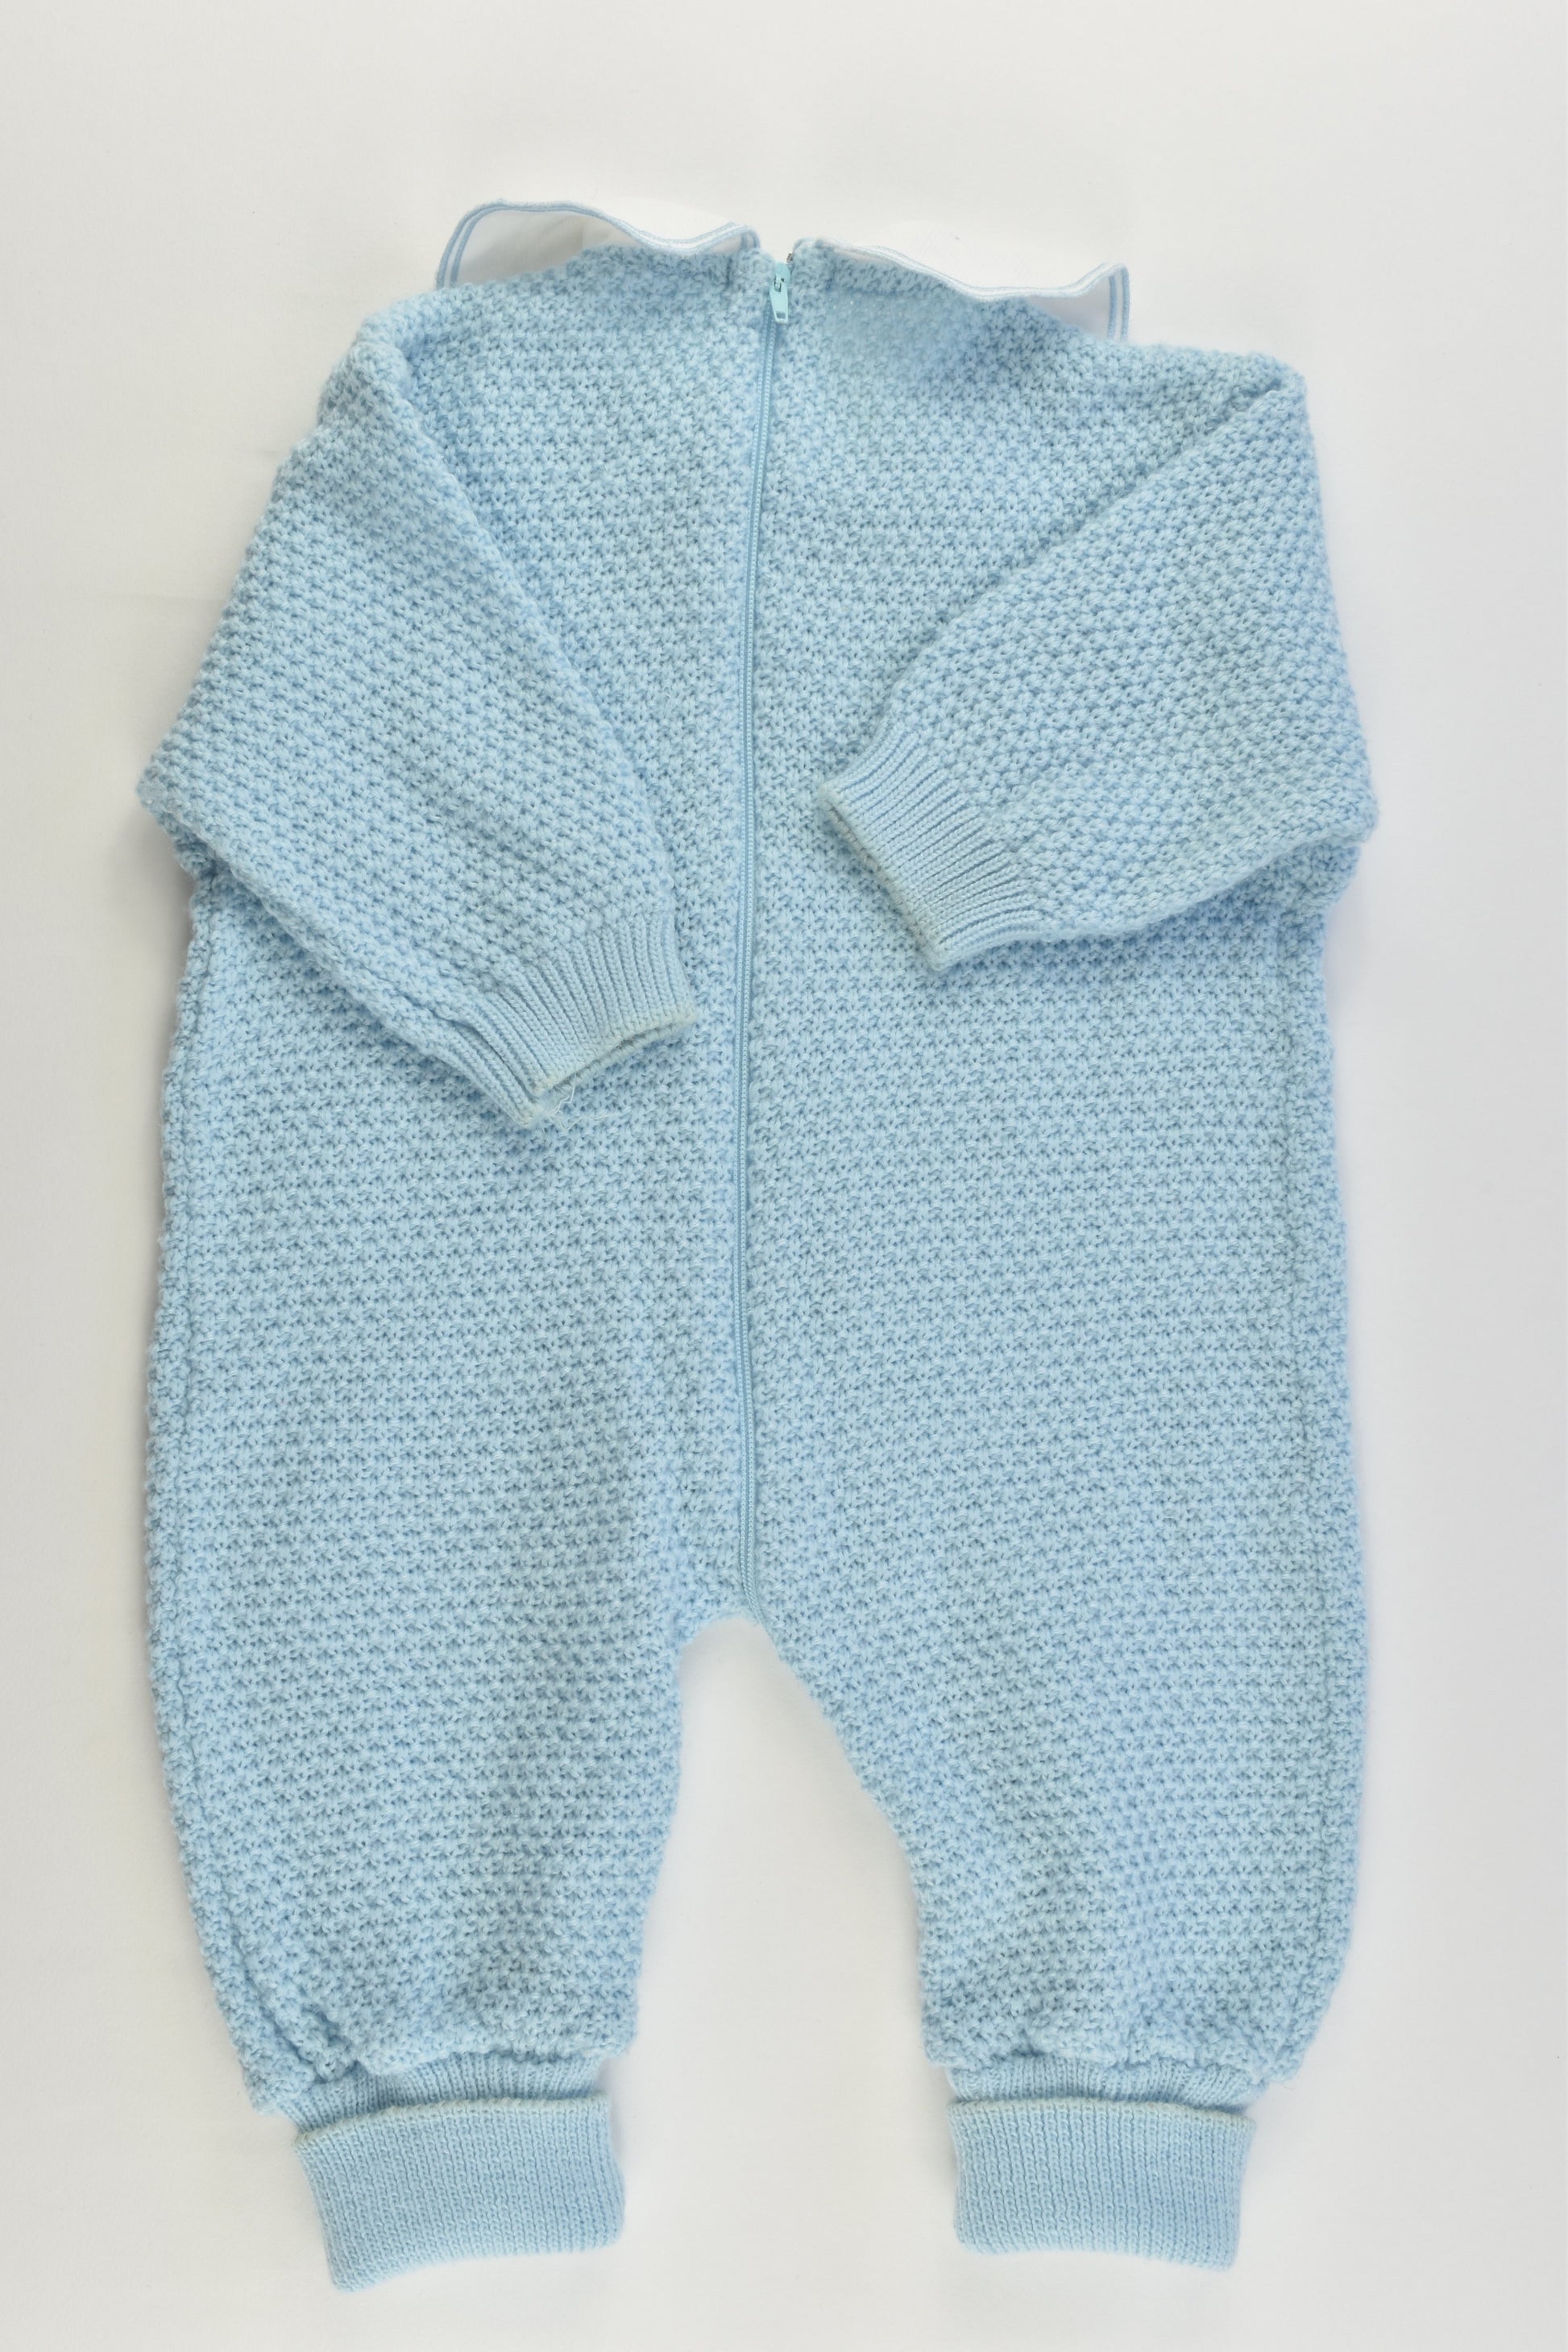 Valco Size 00 (68 cm) Knitted Romper with Squirrels on Collar